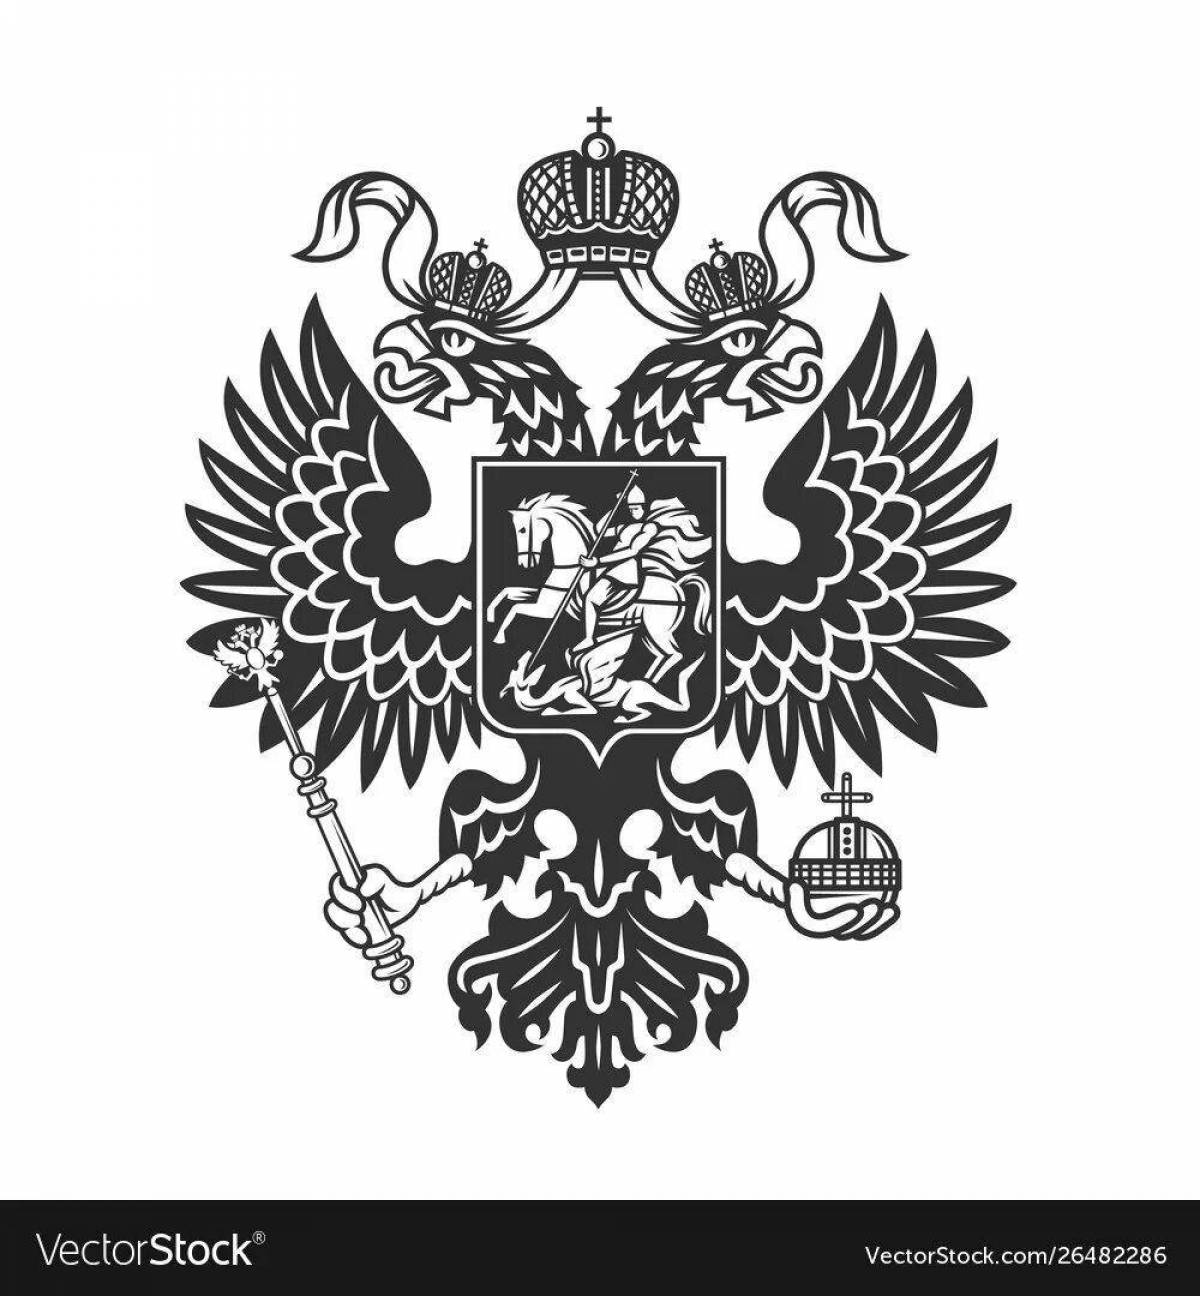 Impressive coat of arms of the Russian Empire